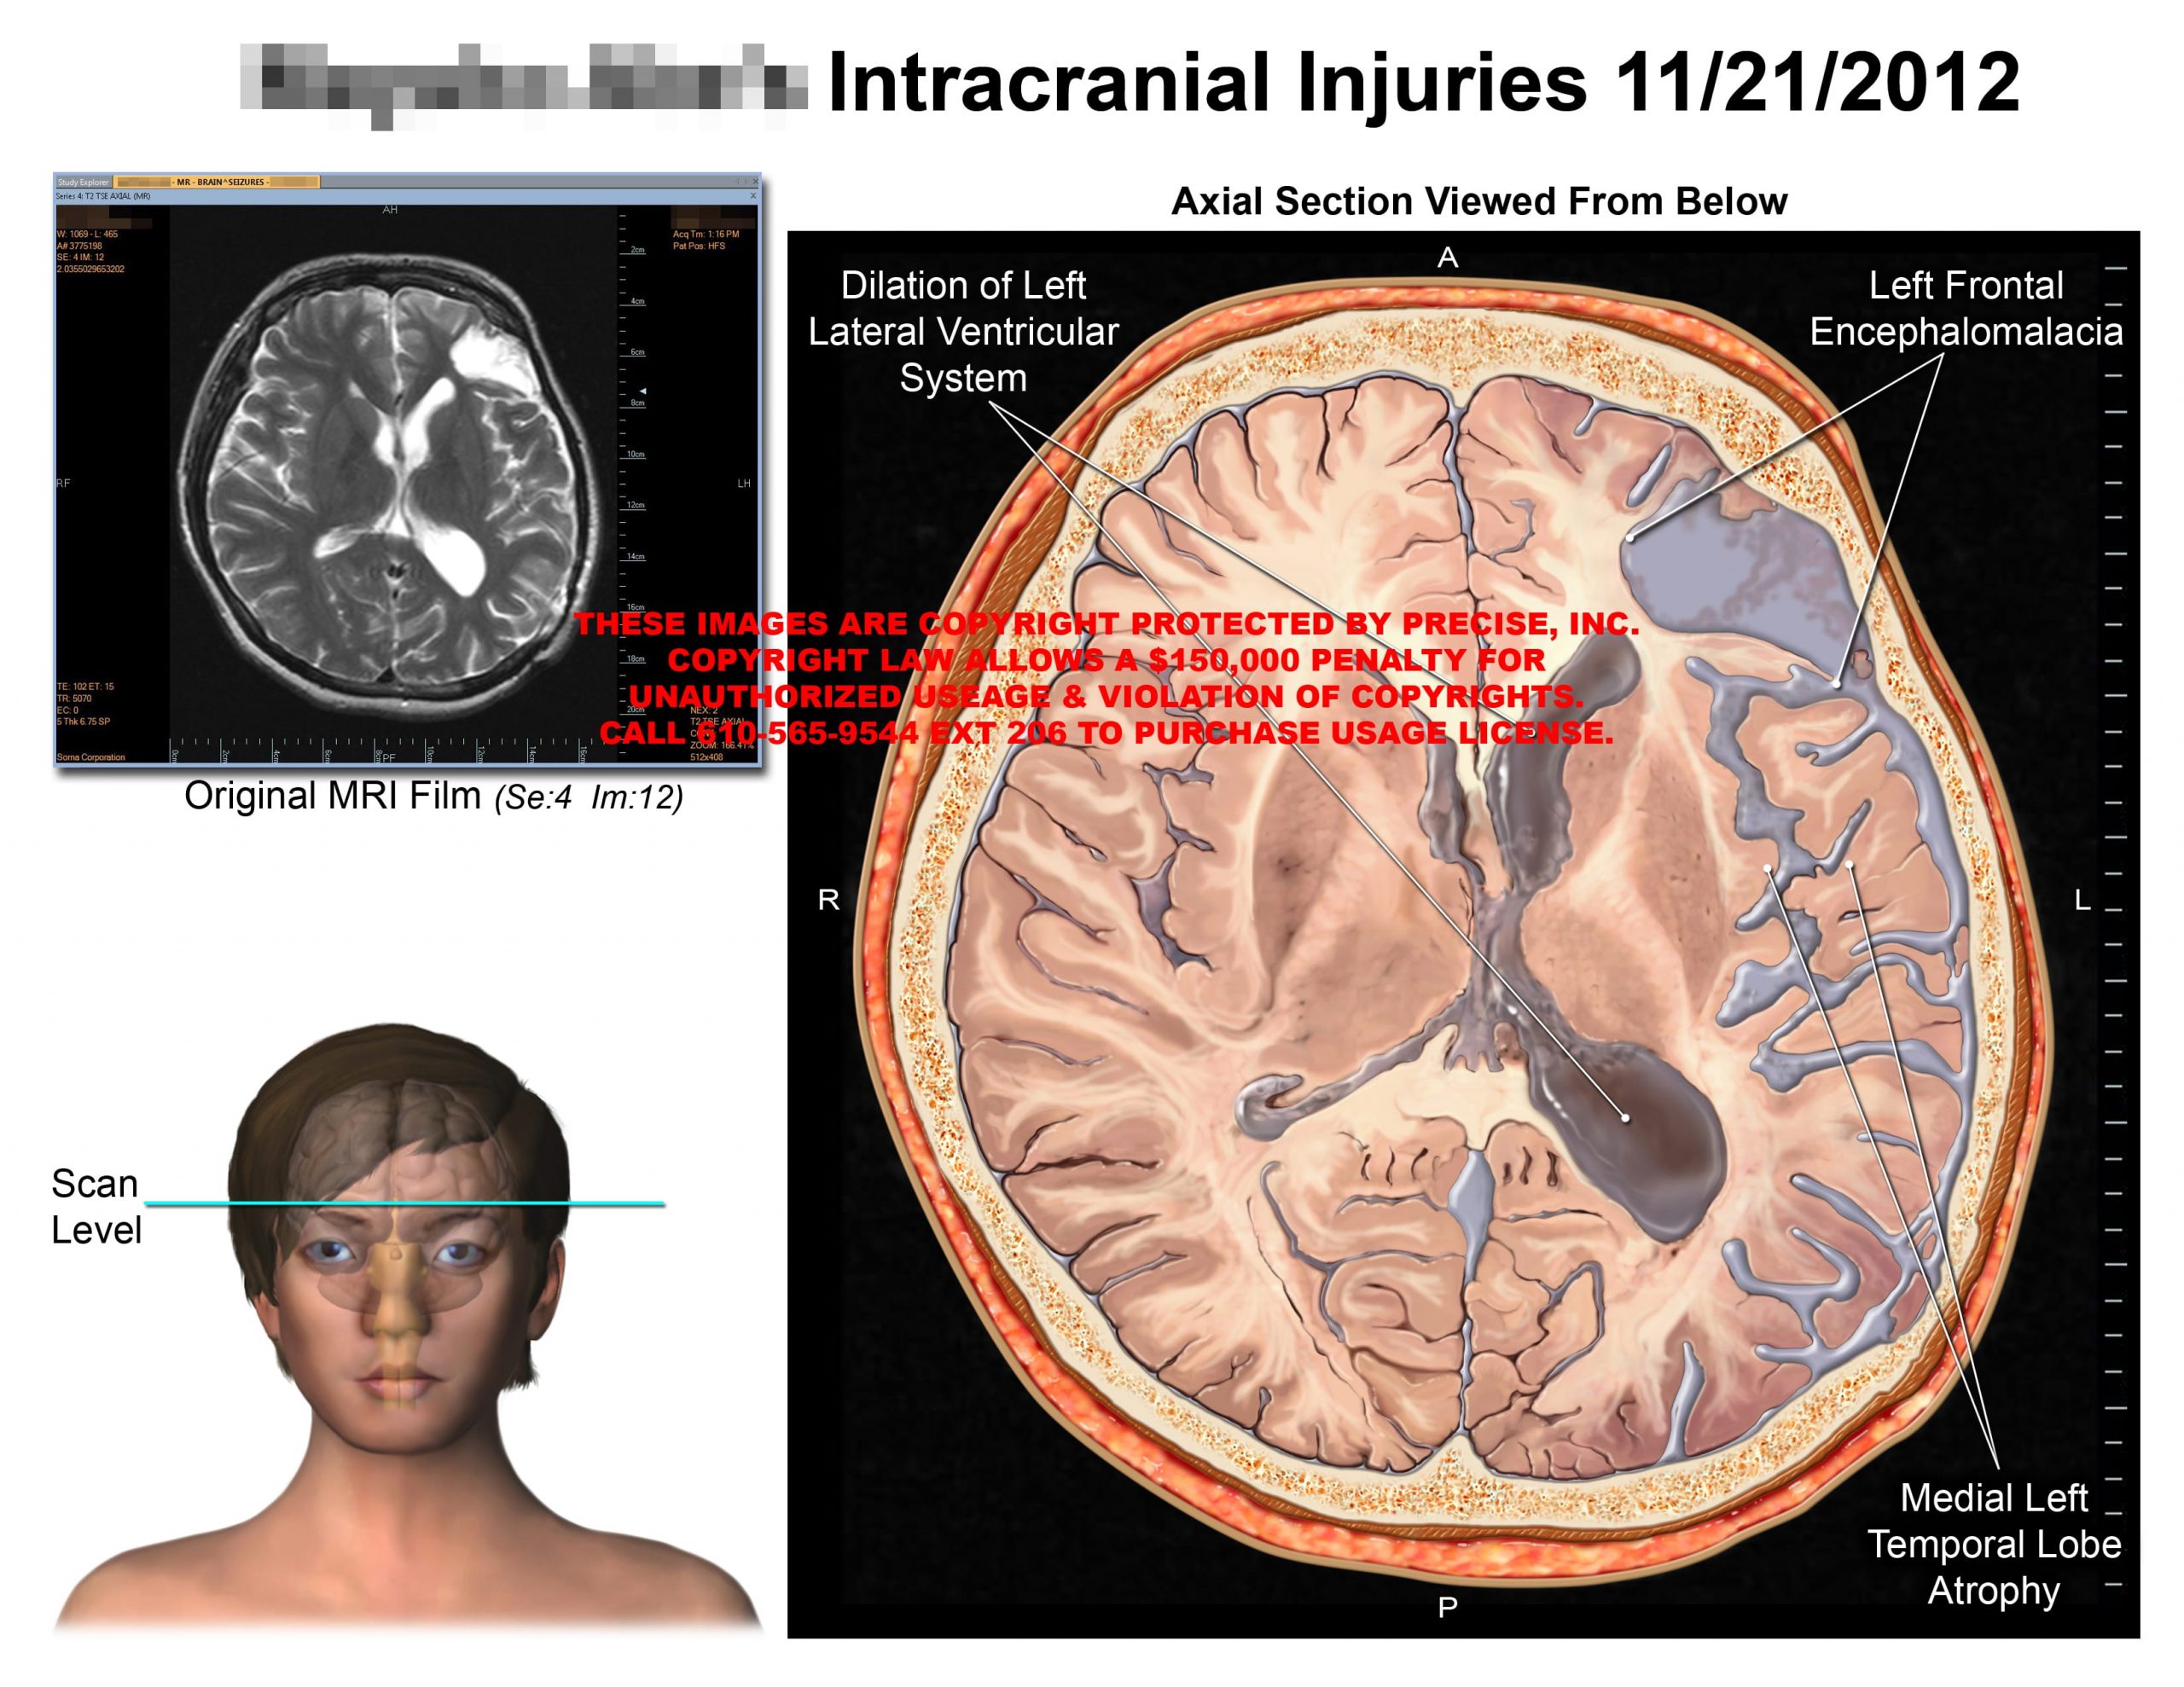 Intracranial Injuries